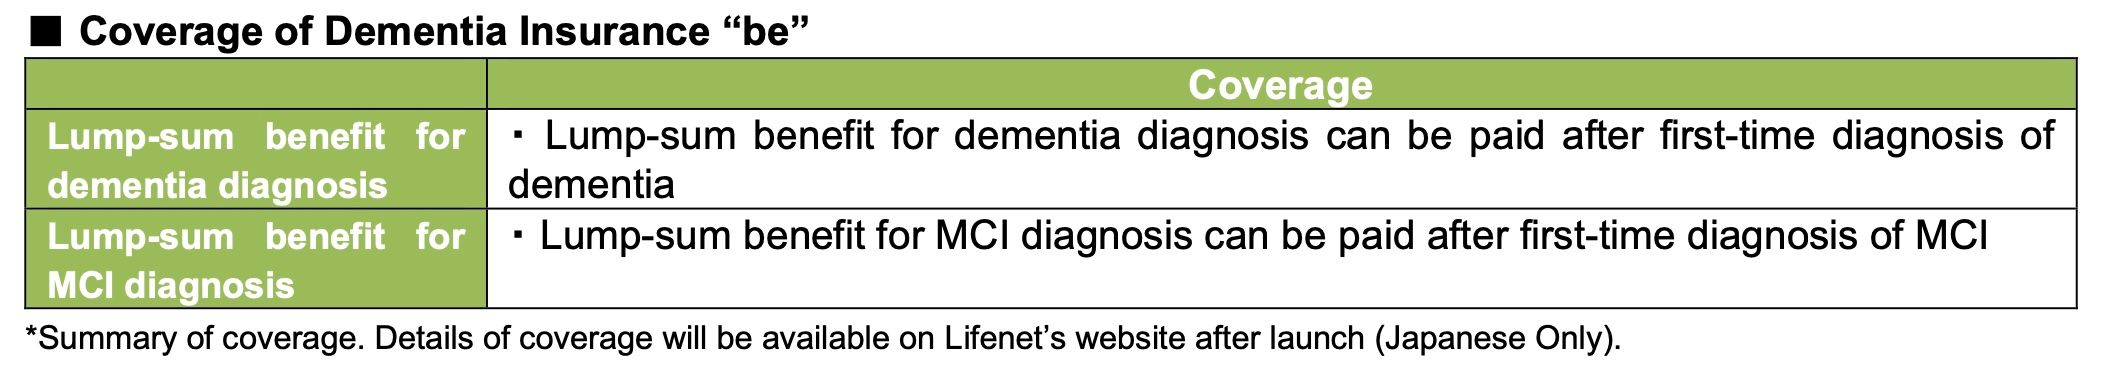 Lifenet and Eisai Co-Develop Dementia Insurance "be"